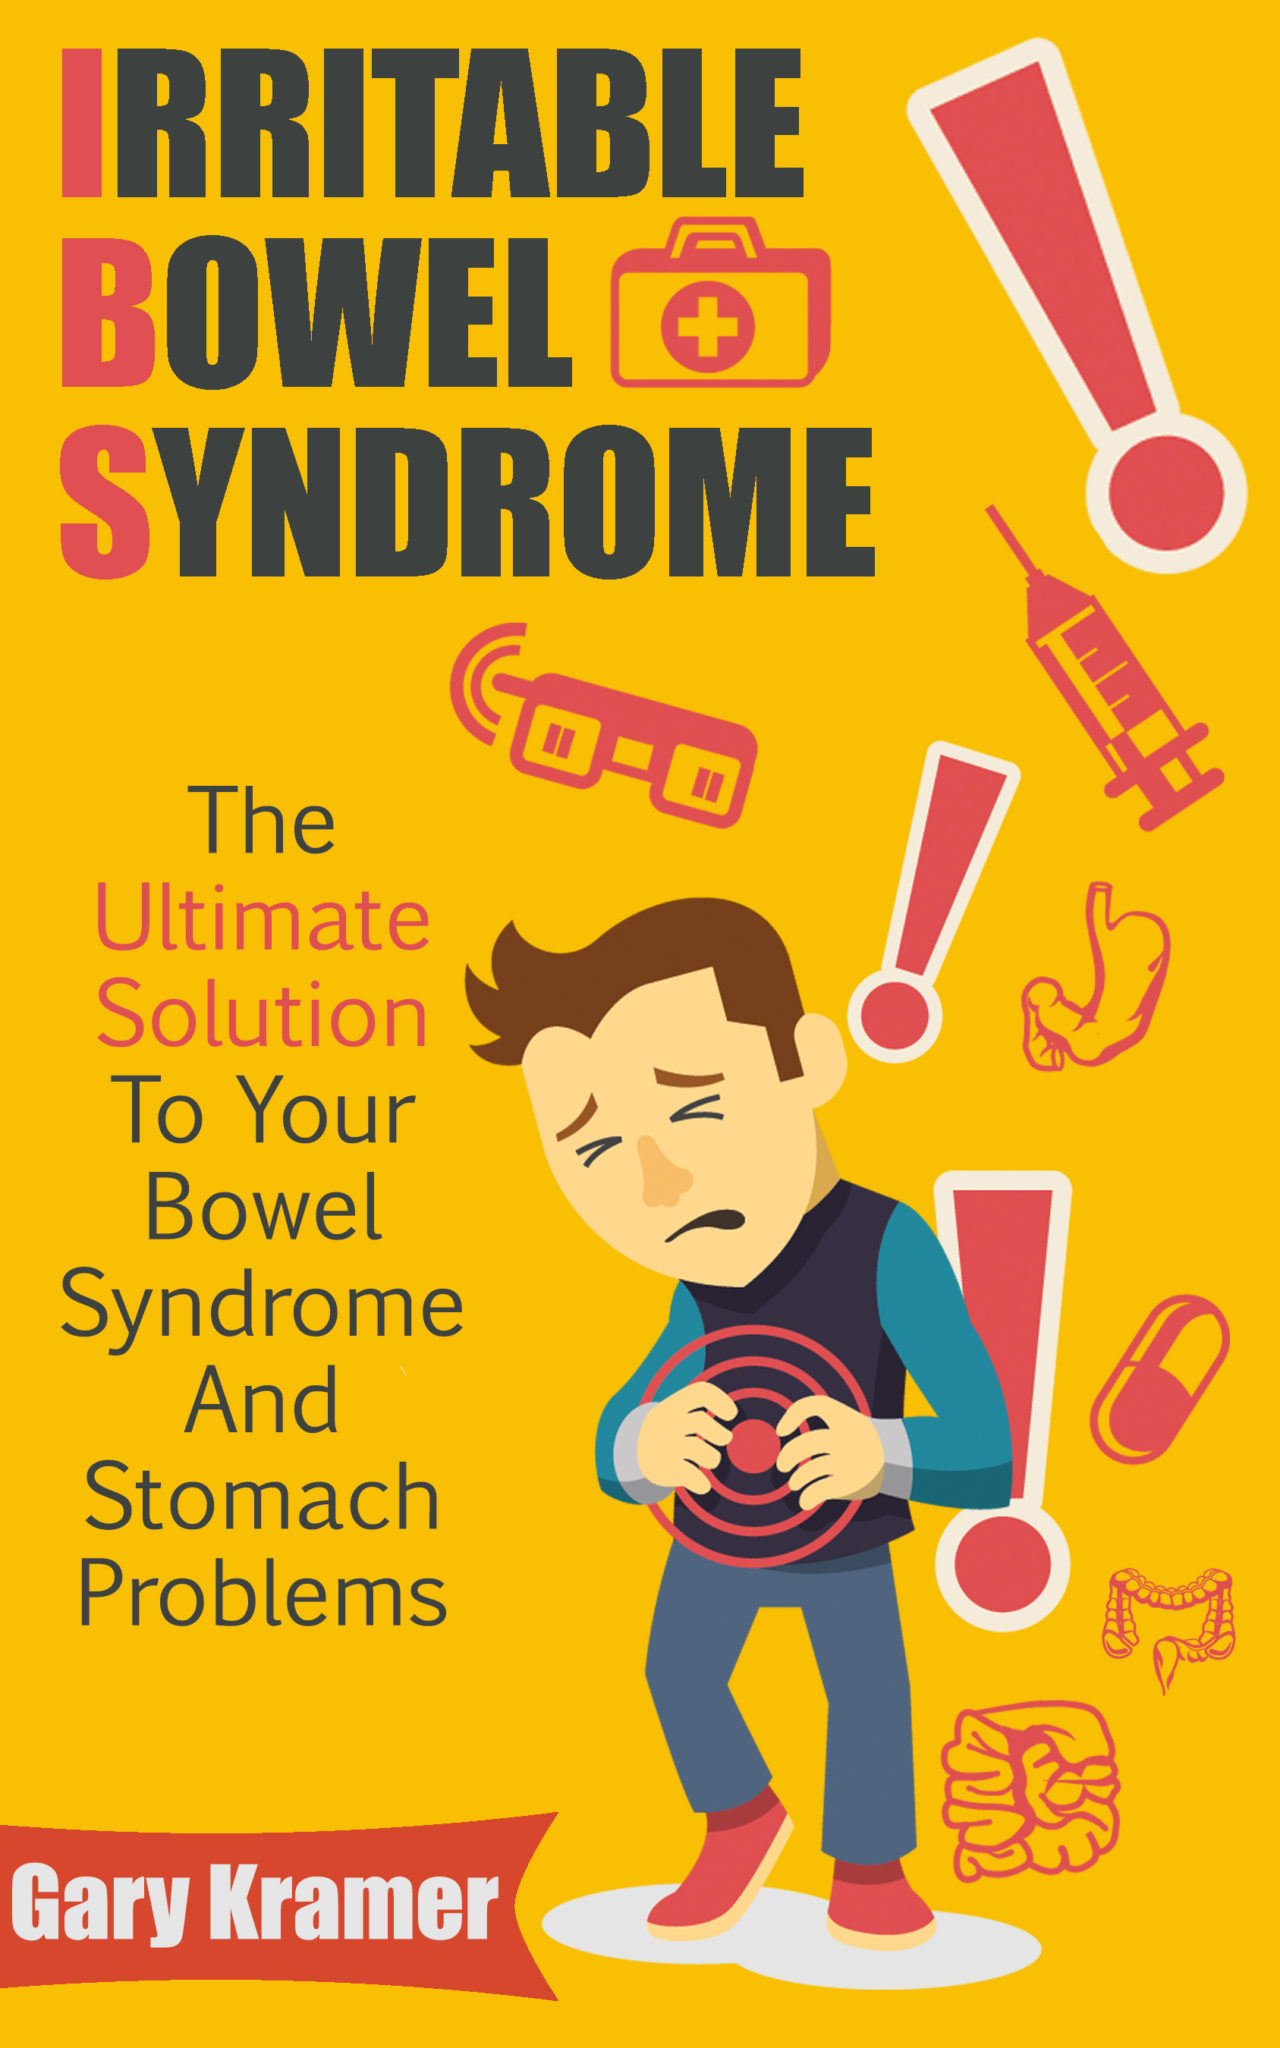 FREE: Irritable Bowel Syndrome: The Ultimate Solution To Your Bowel Syndrome And Stomach Problems by Gary Kramer